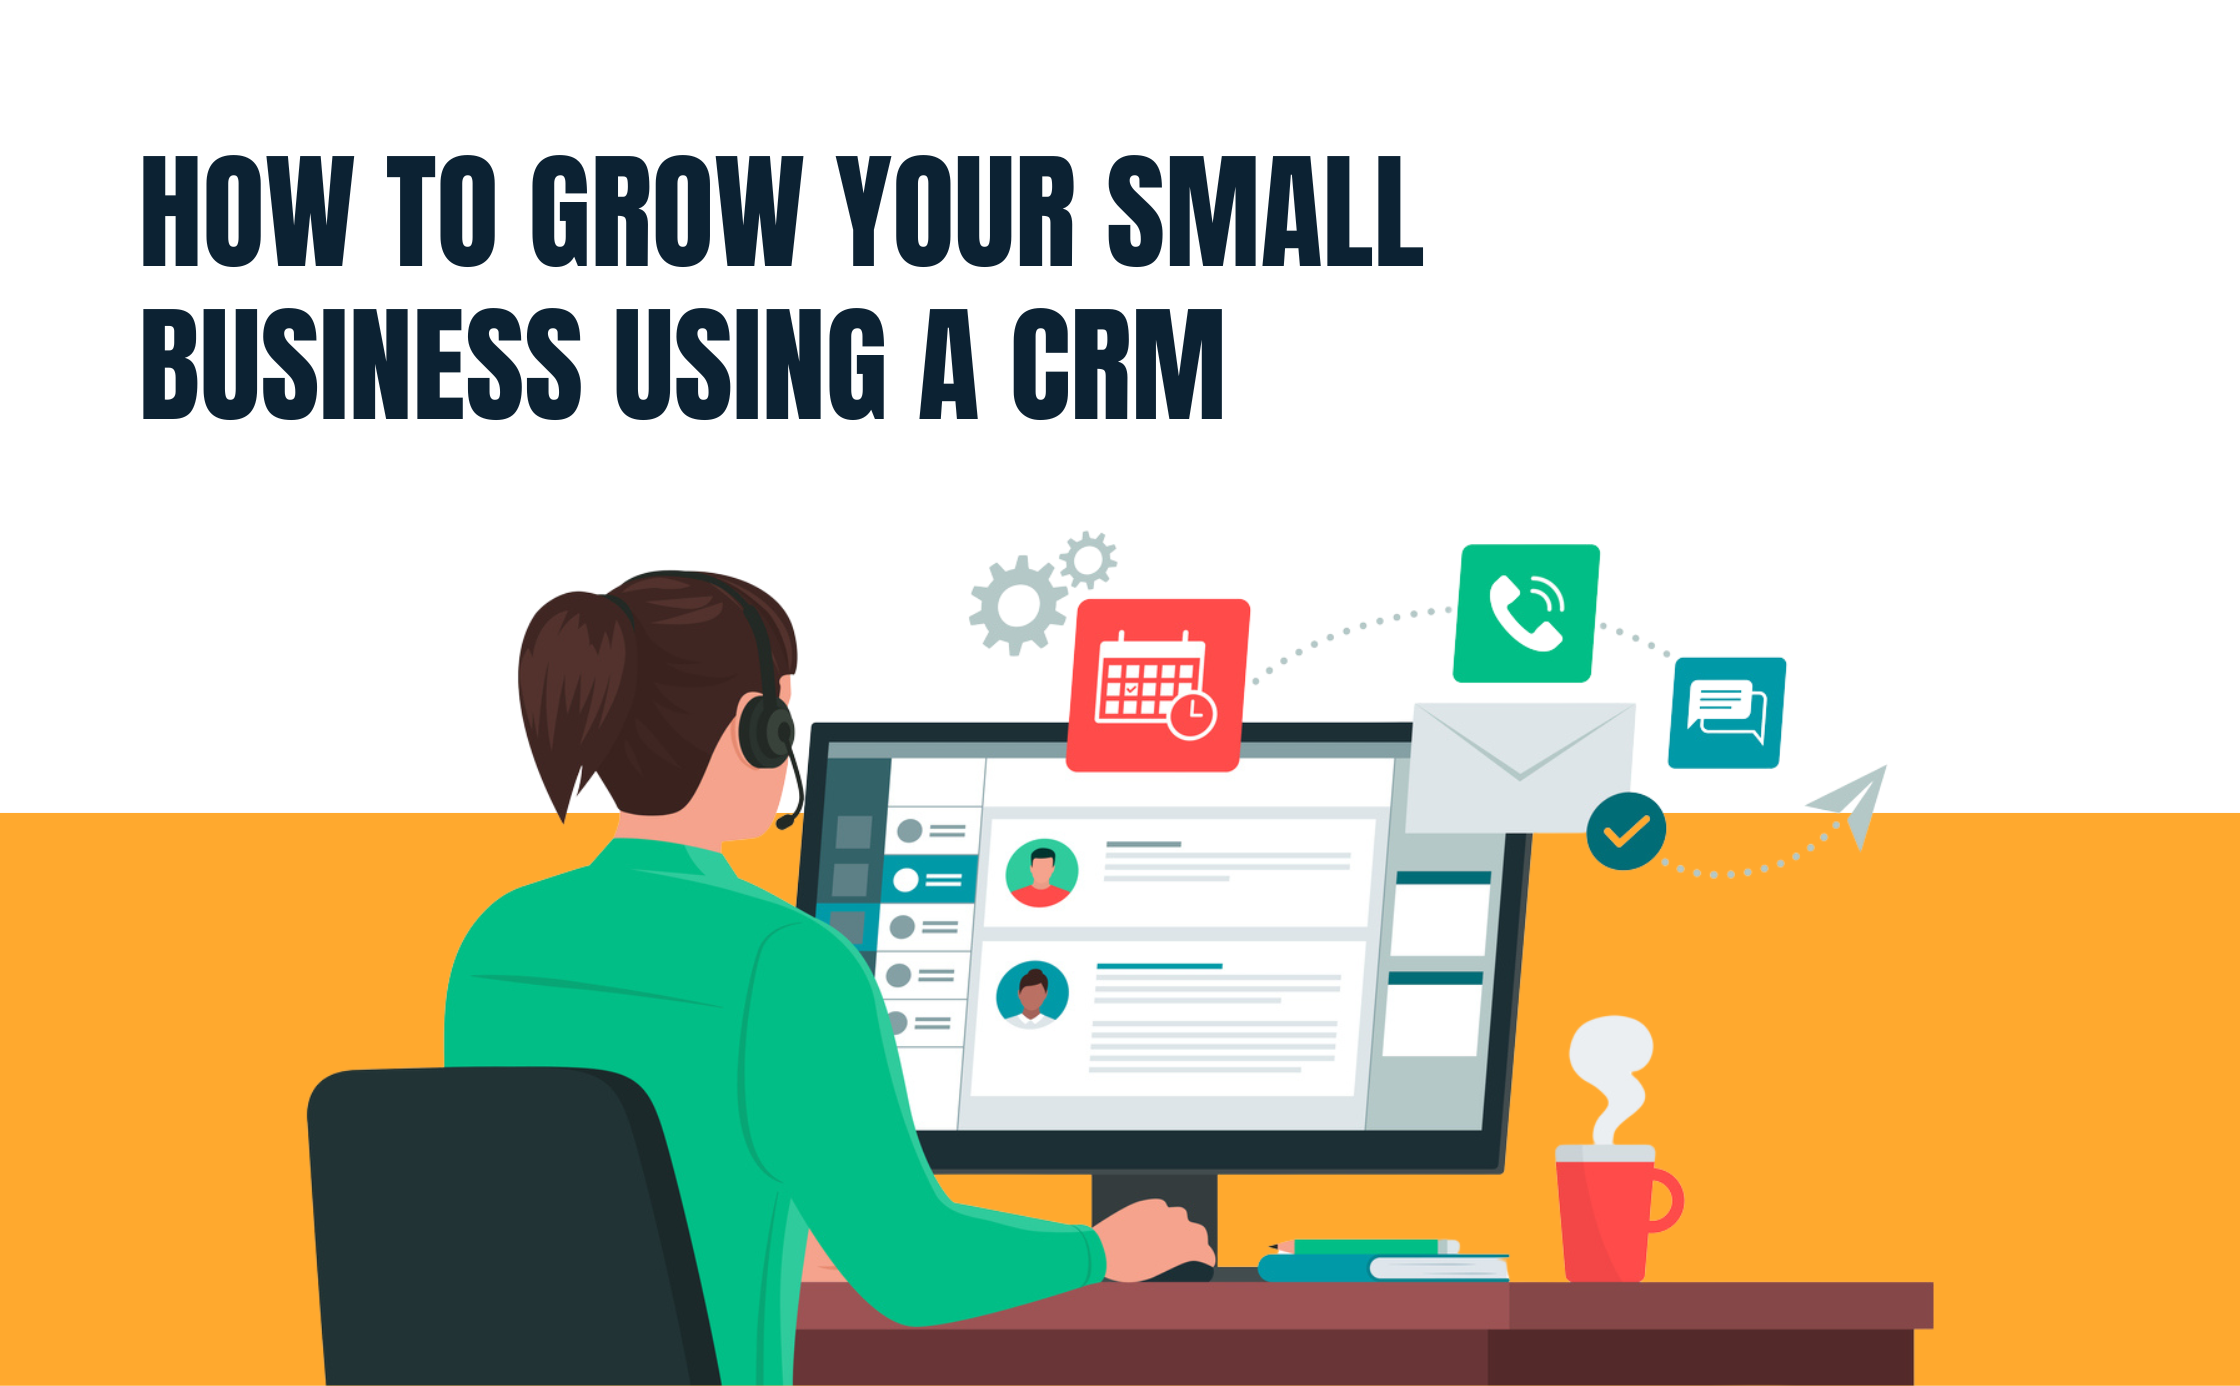 How to Grow Your Small Business Using a CRM